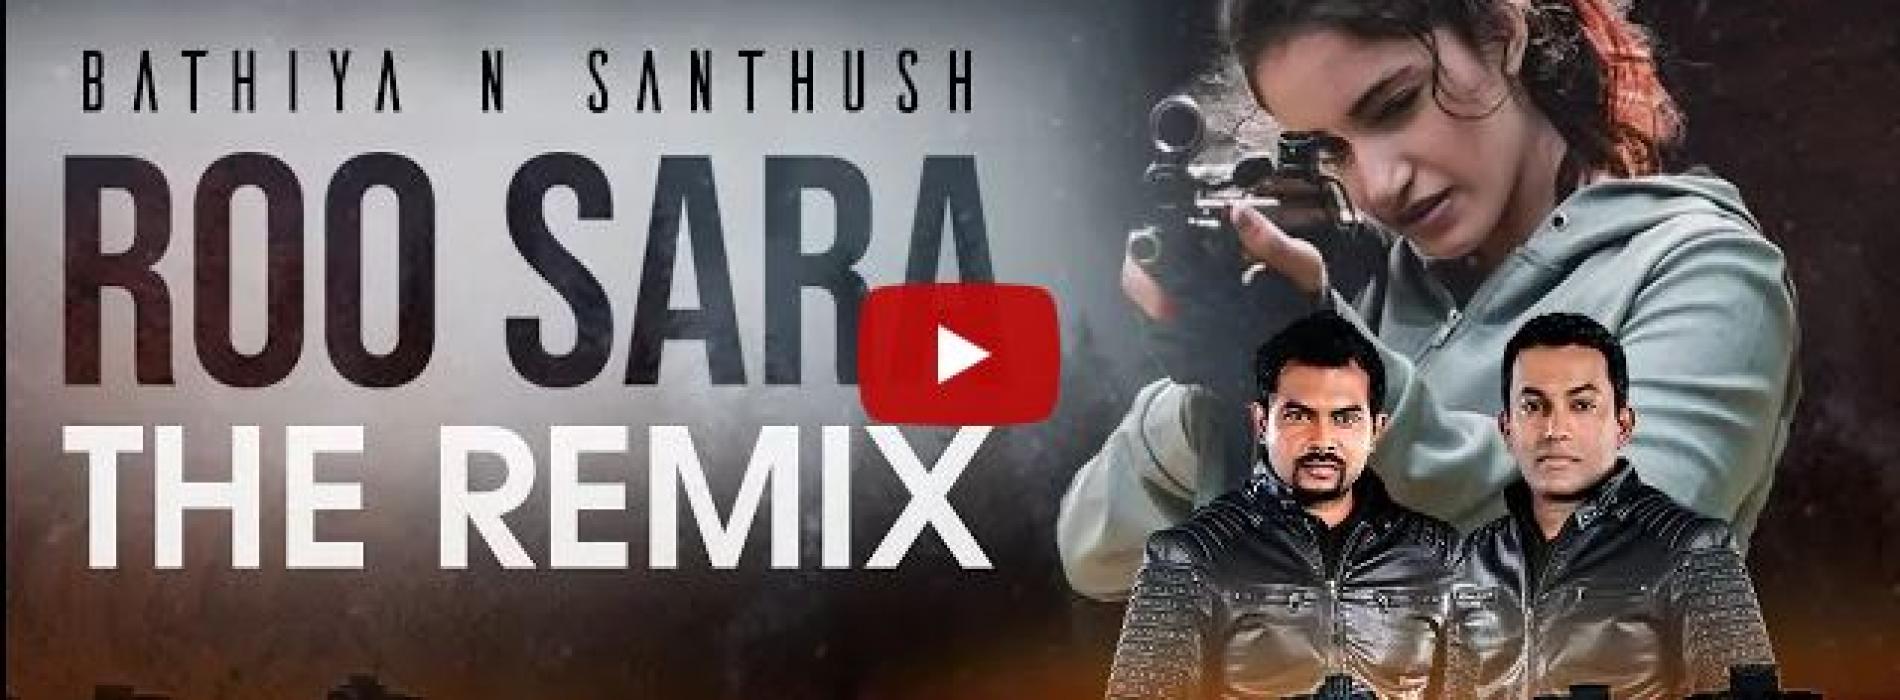 New Music : Roo Sara The Remix – Bathiya and Santhush | Official Remix by Dexter Beats